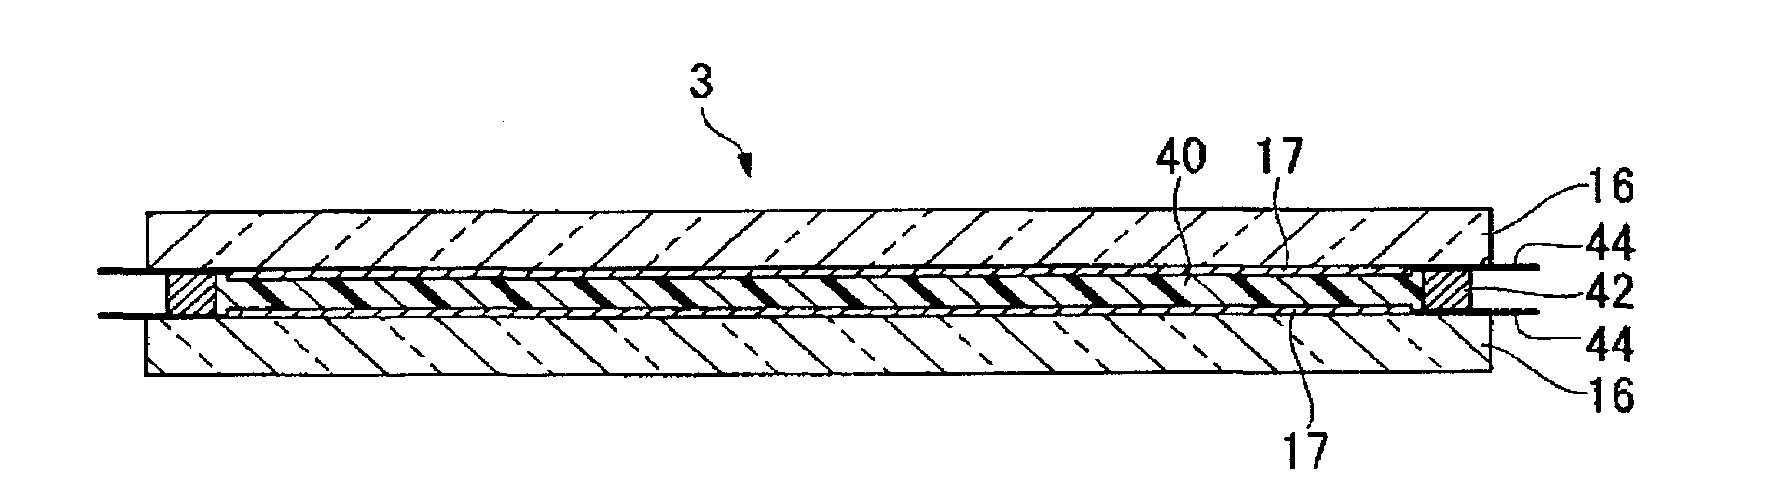 Process for producing solar cell module